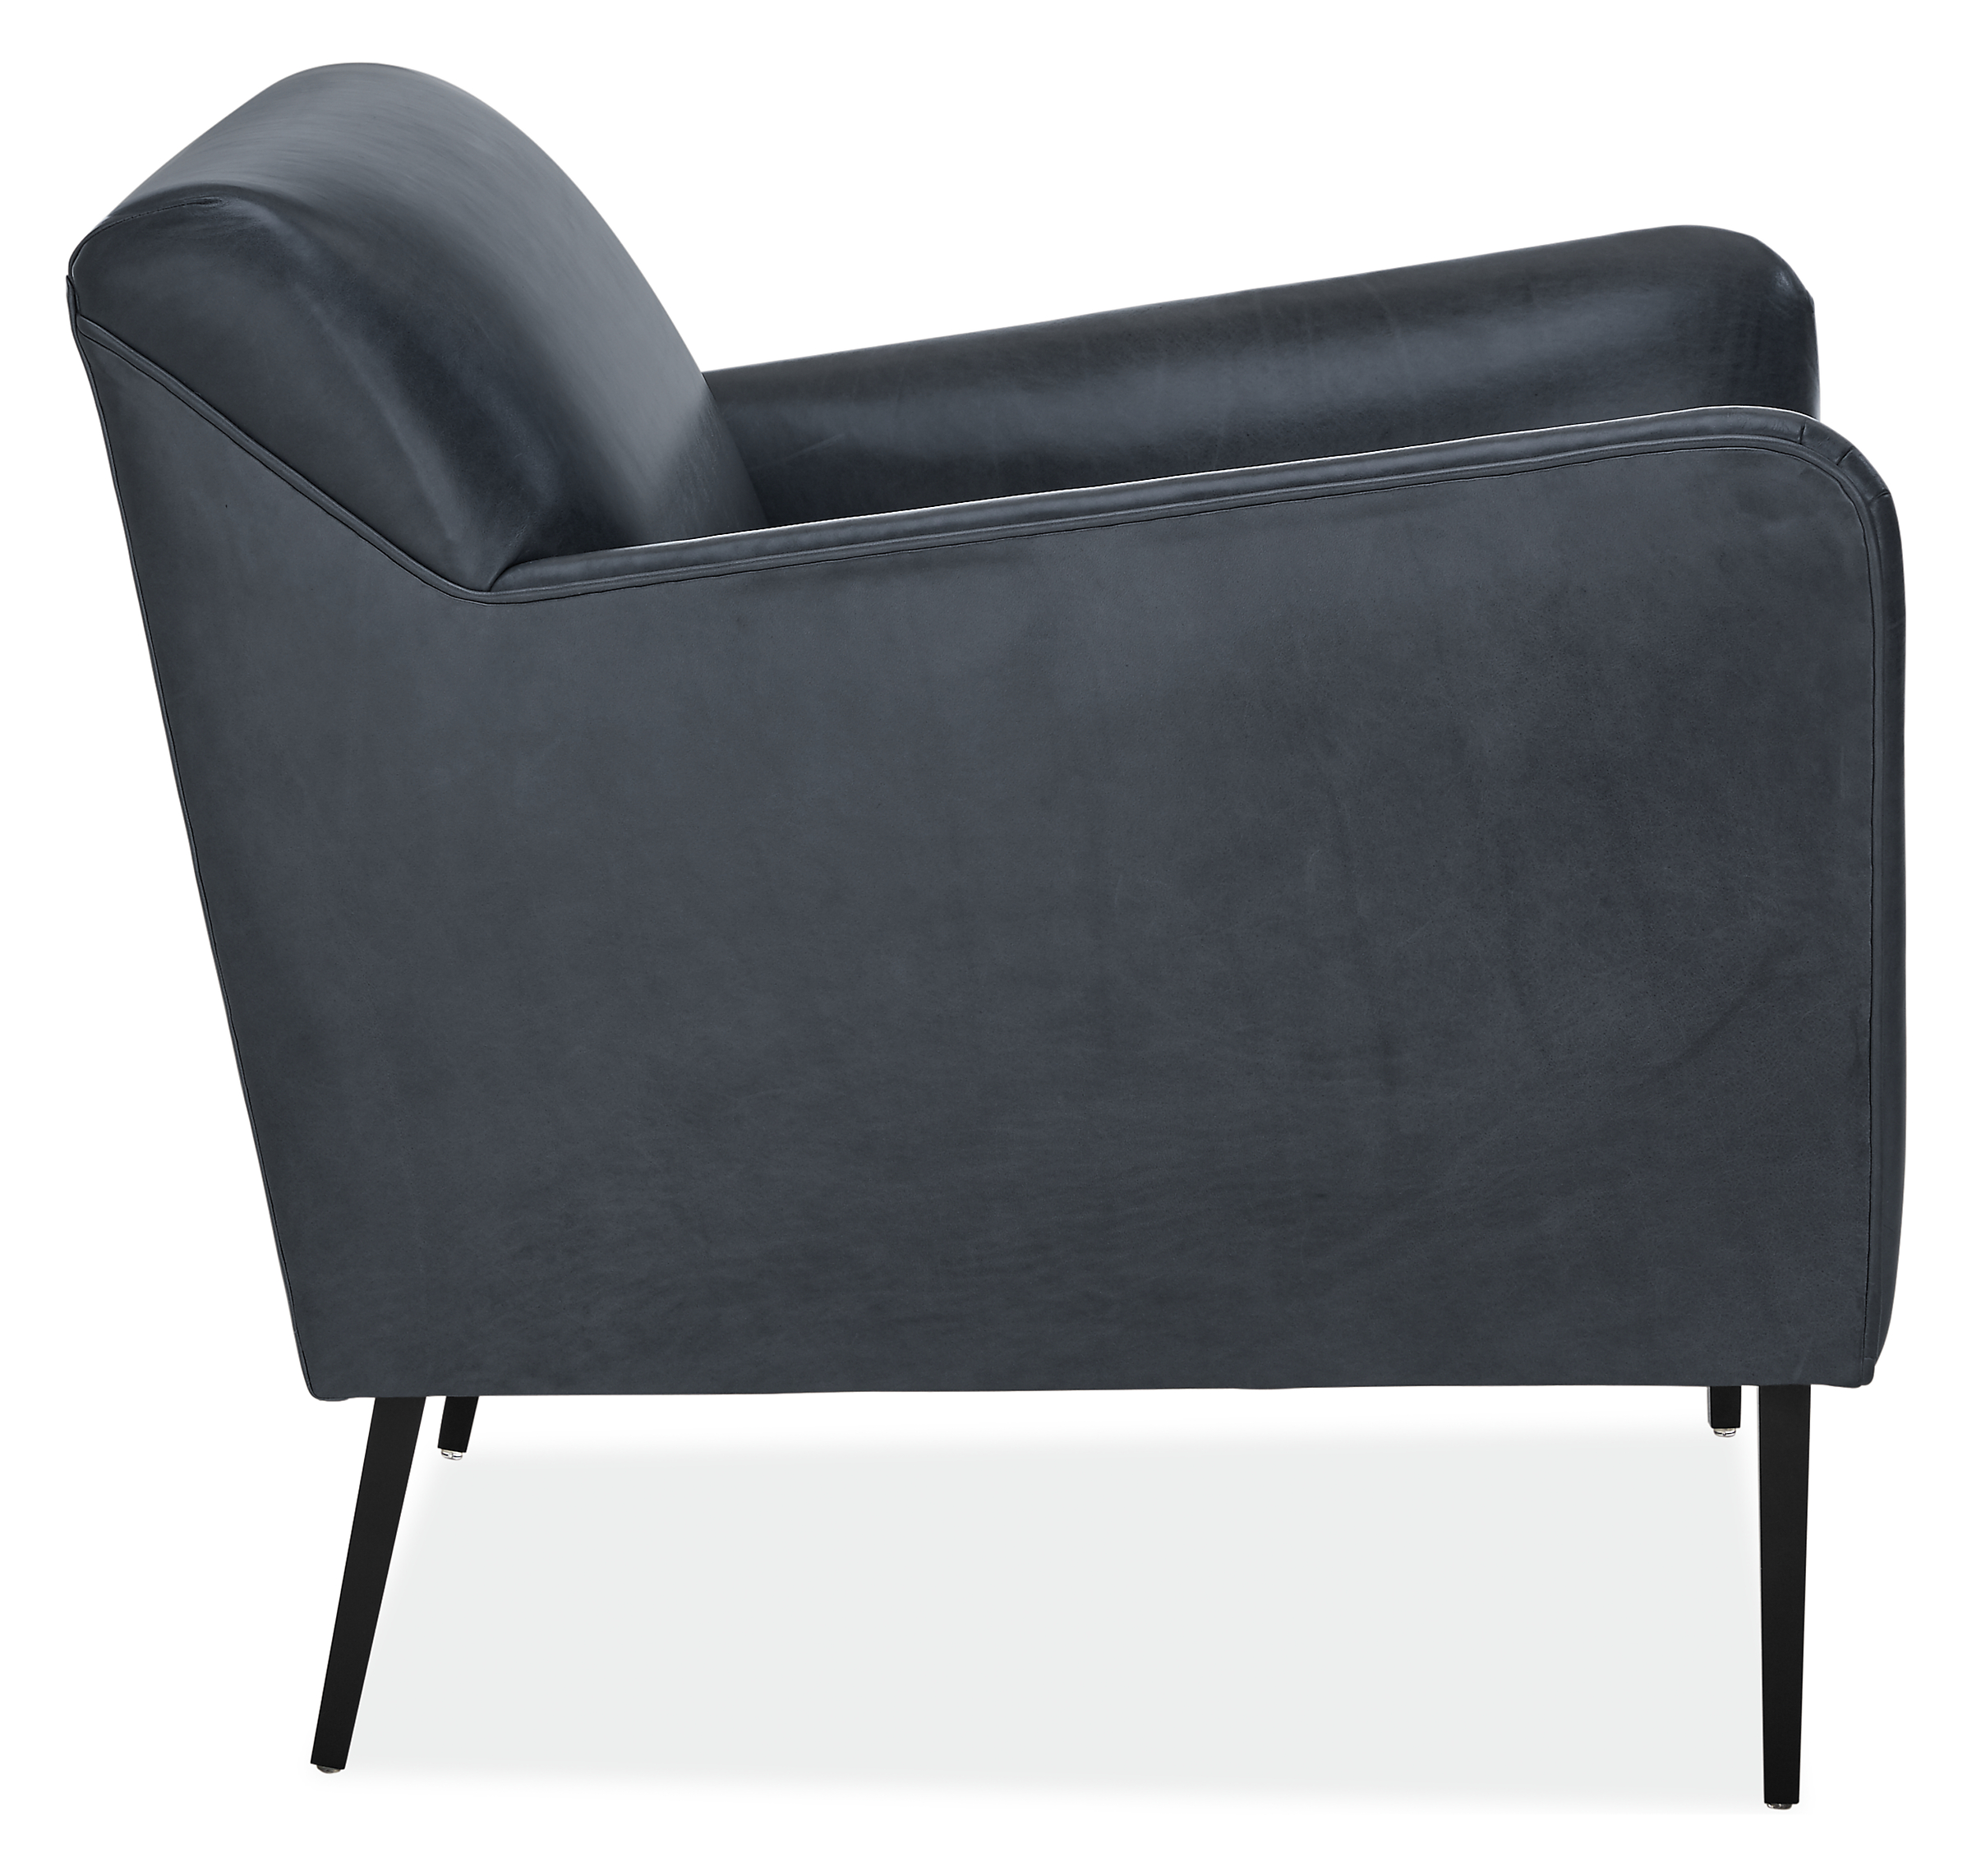 Side view of Matteo Chair in Vento Leather.